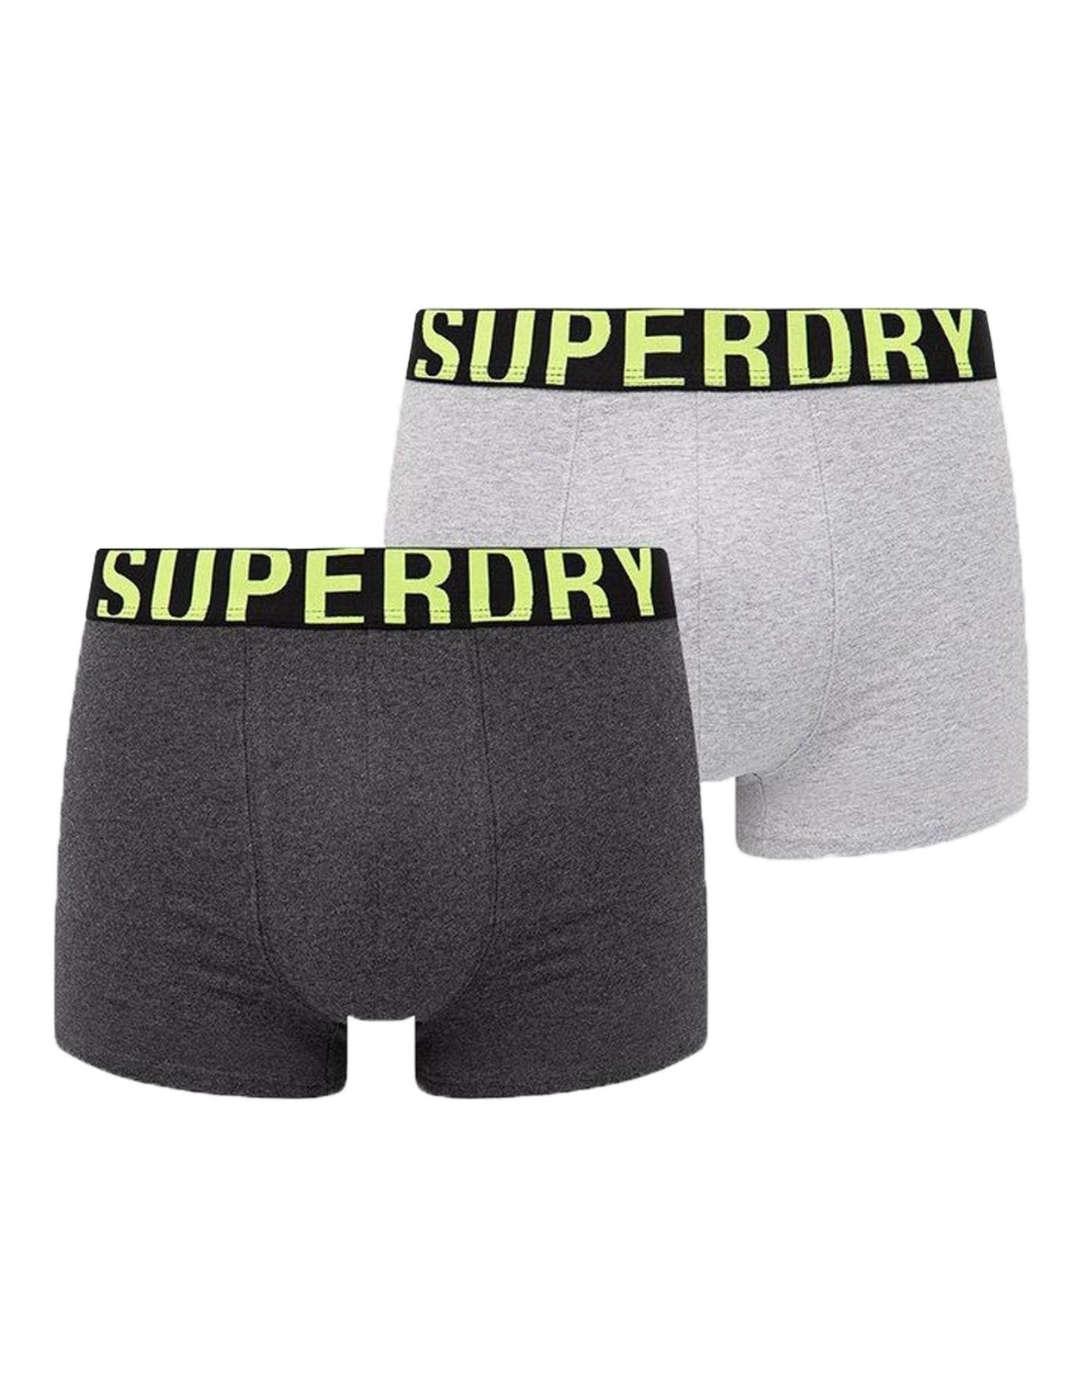 Intimo Superdry pack-2 trunk fluor para hombre